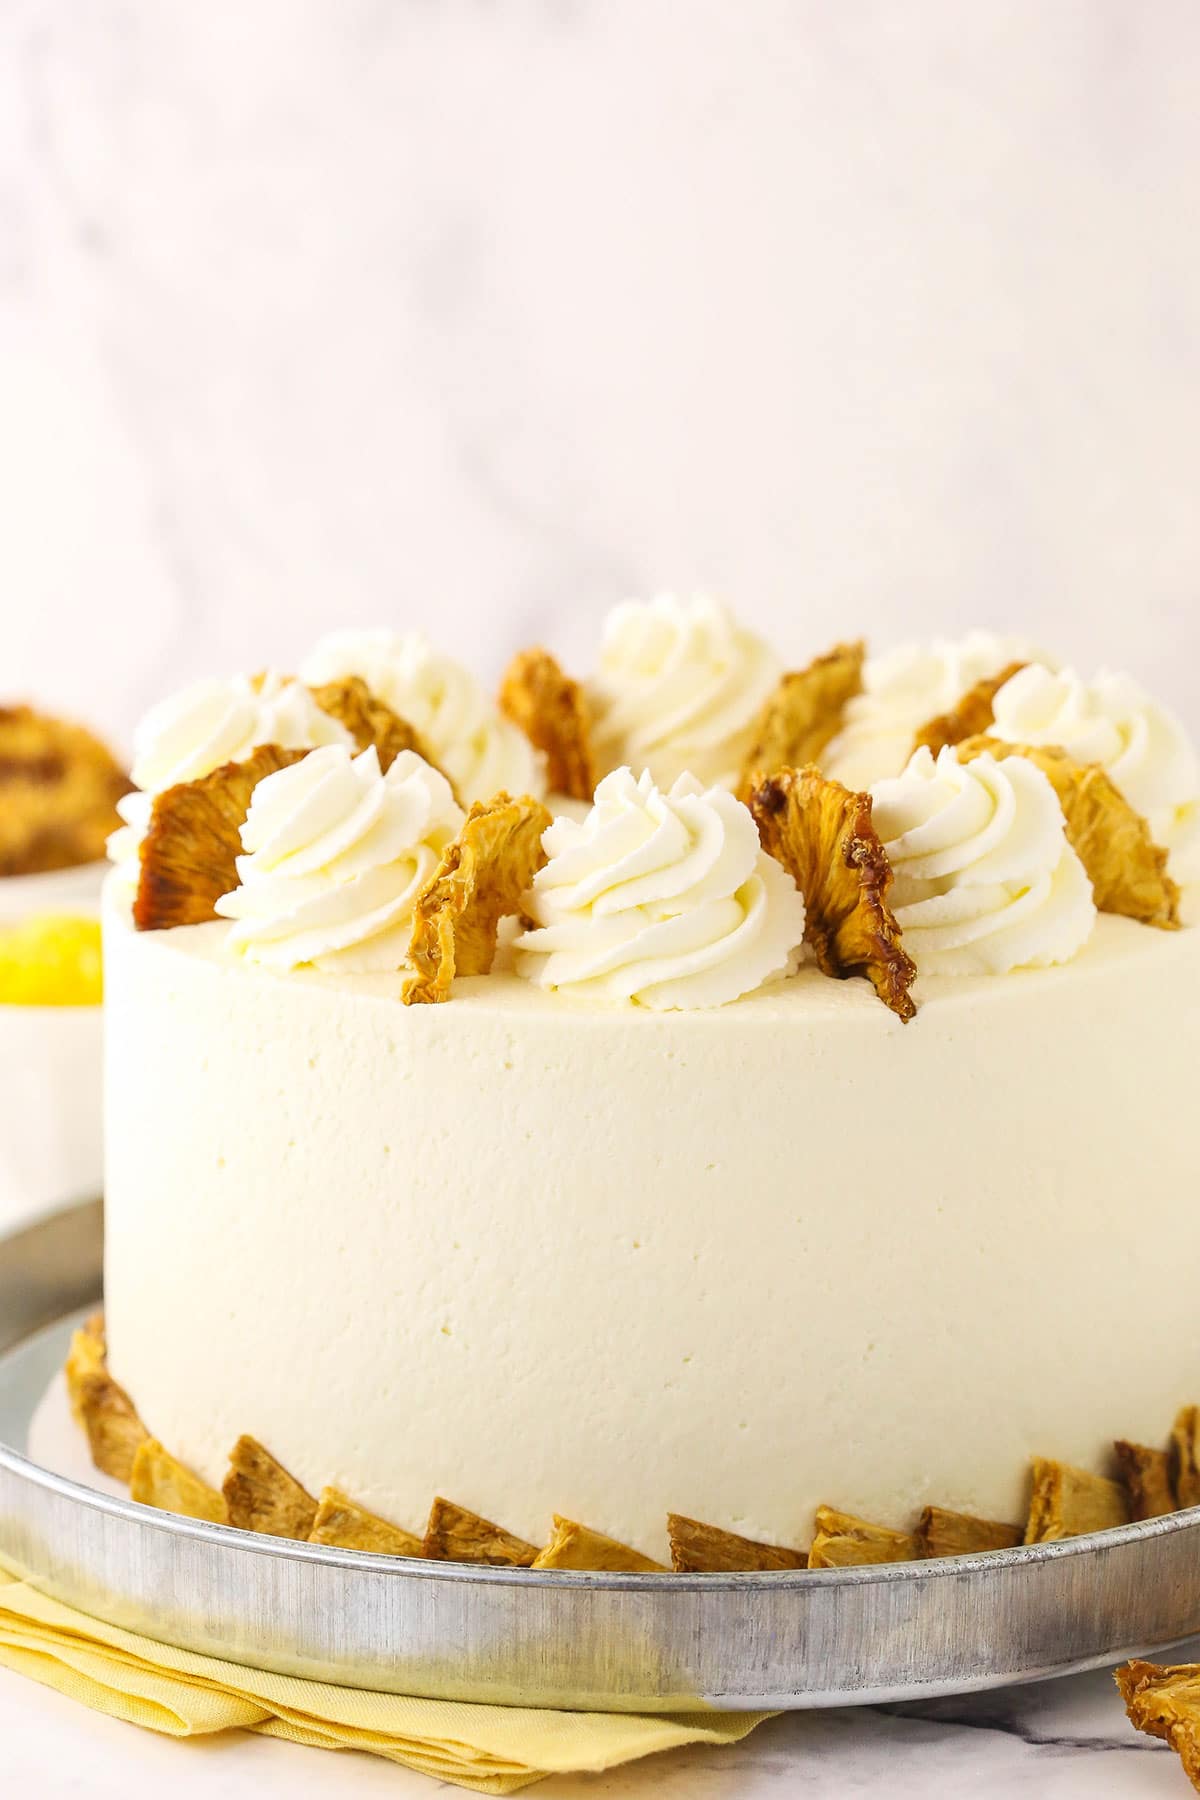 A pineapple layer cake topped with swirls of whipped cream frosting and dried pineapple pieces